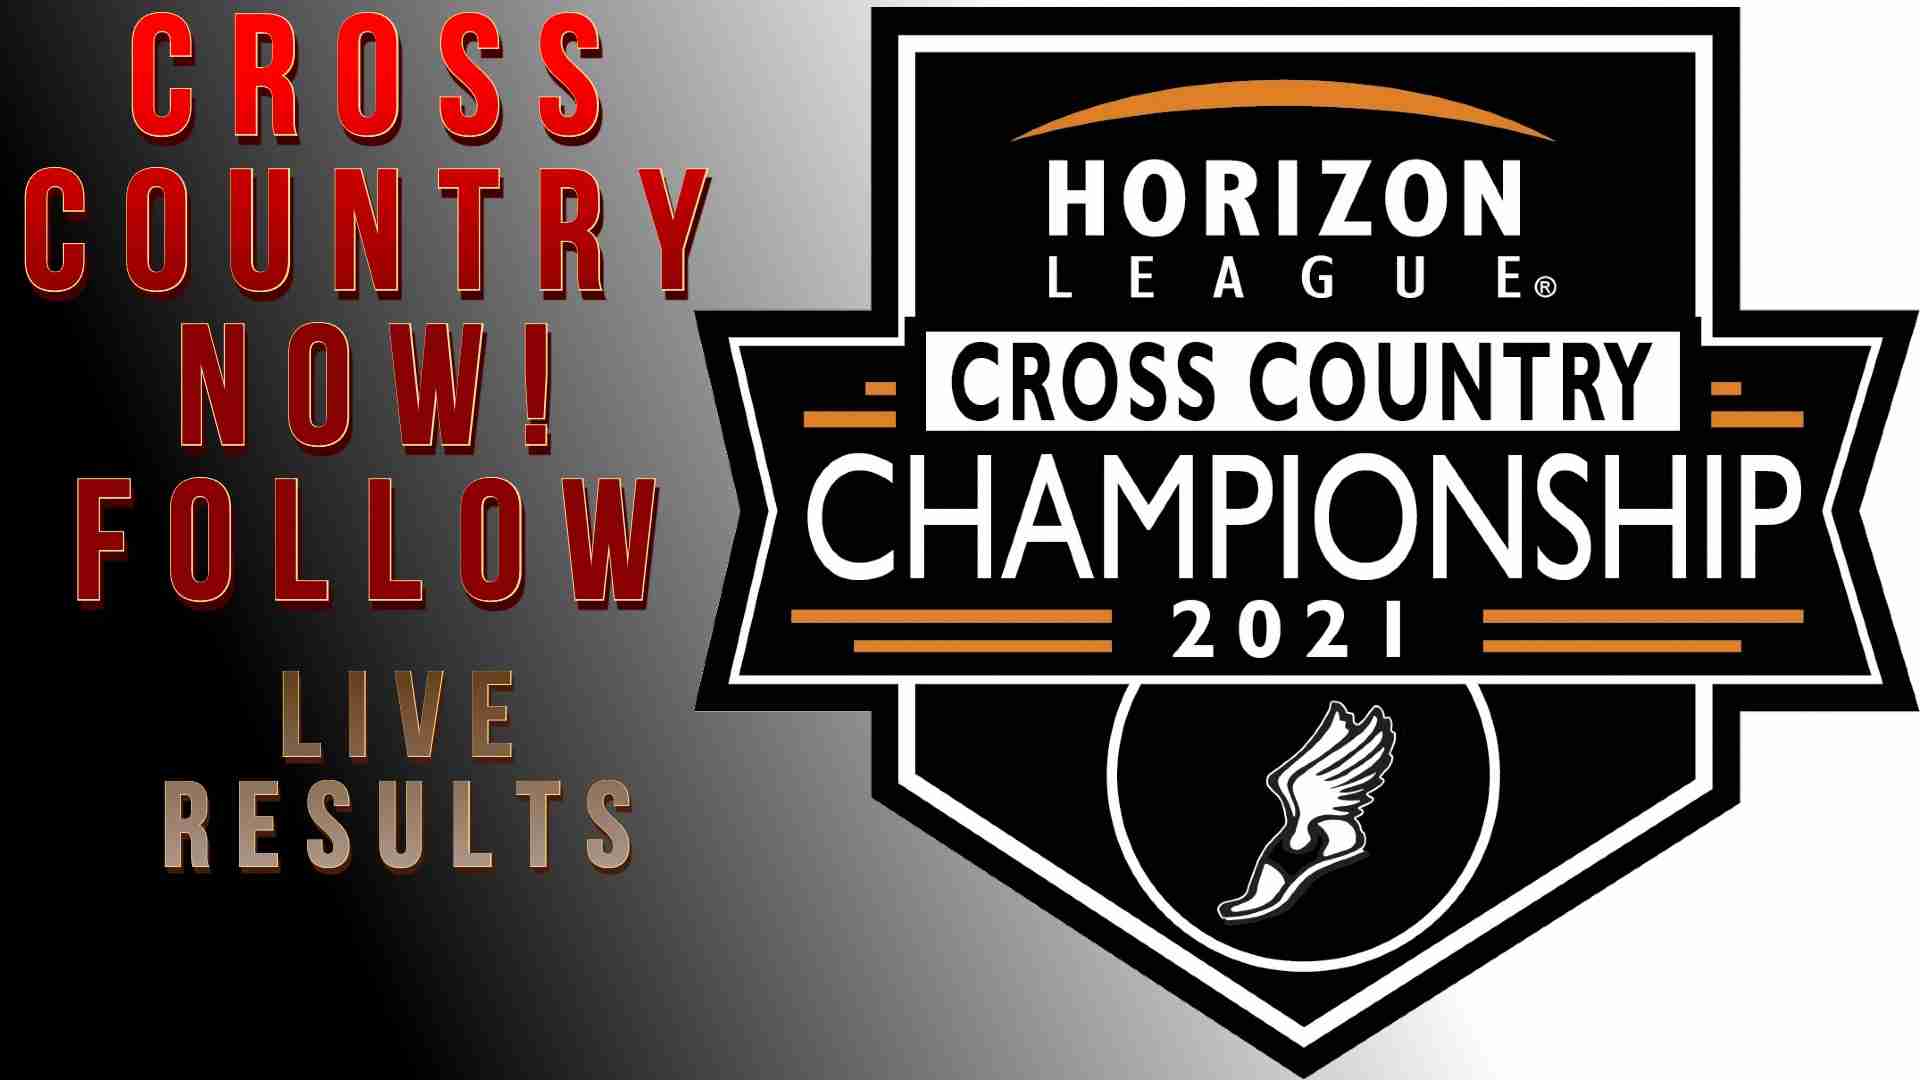 How to follow the 2021 Horizon League Cross Country Championships